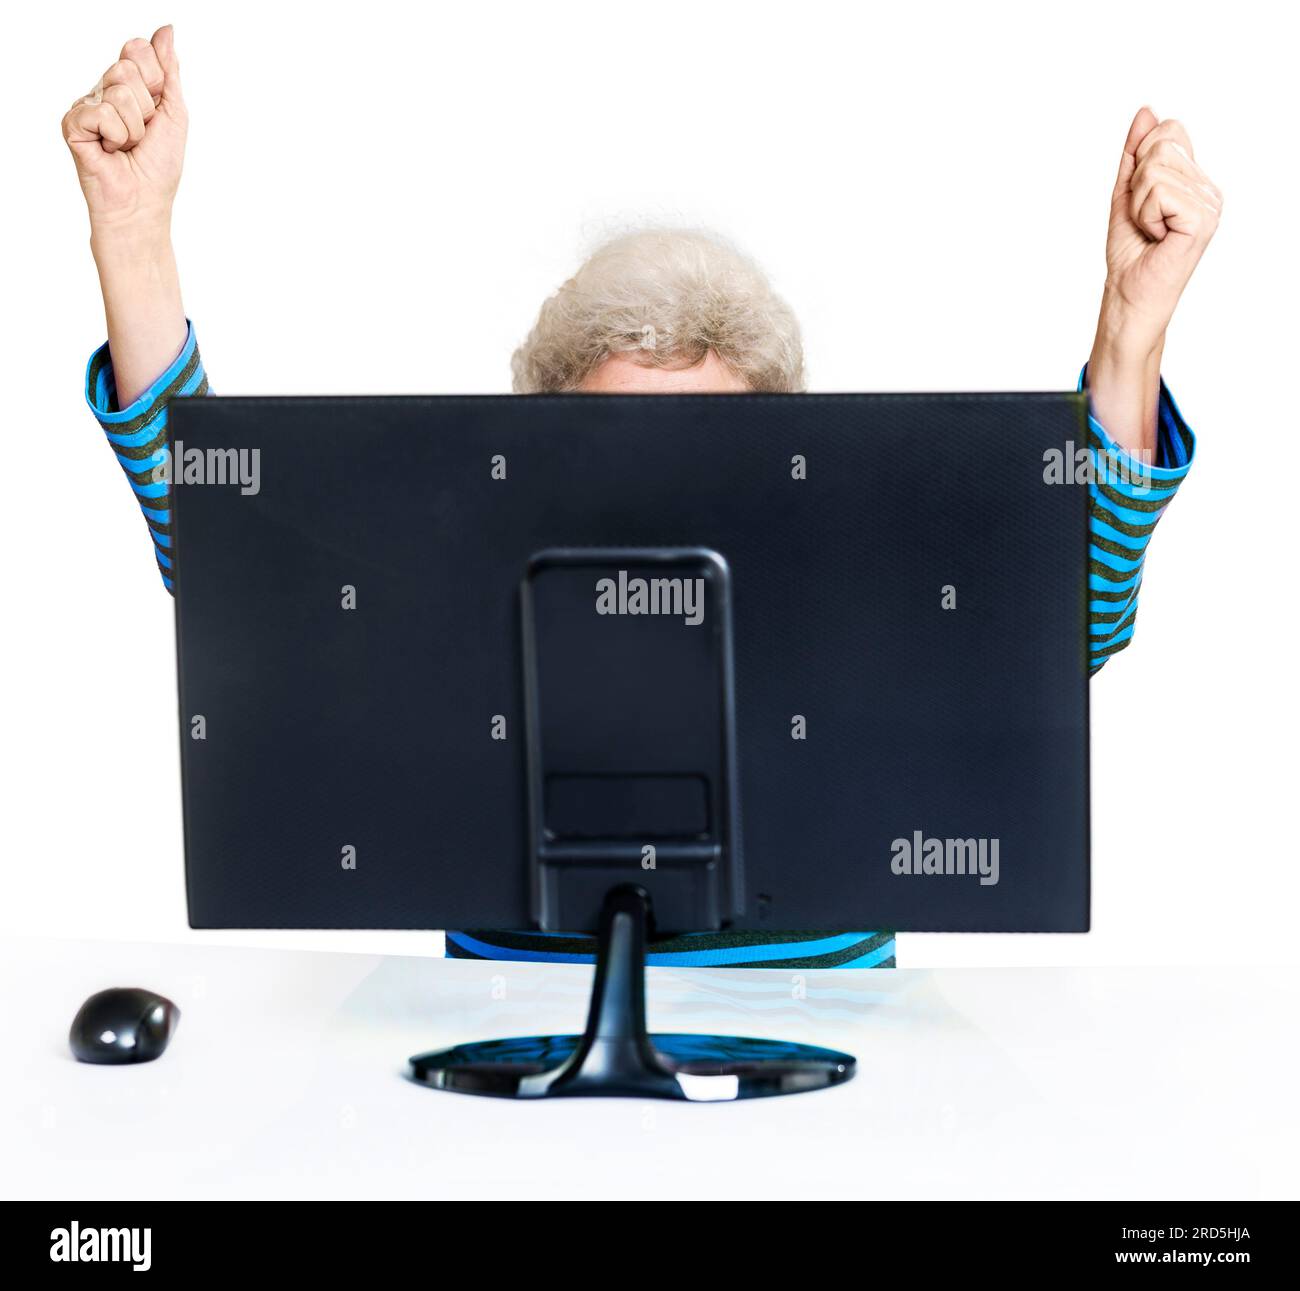 Gesture of success, victory. Senior hidden behind a computer monitor. Cheering with hands up. White background Stock Photo